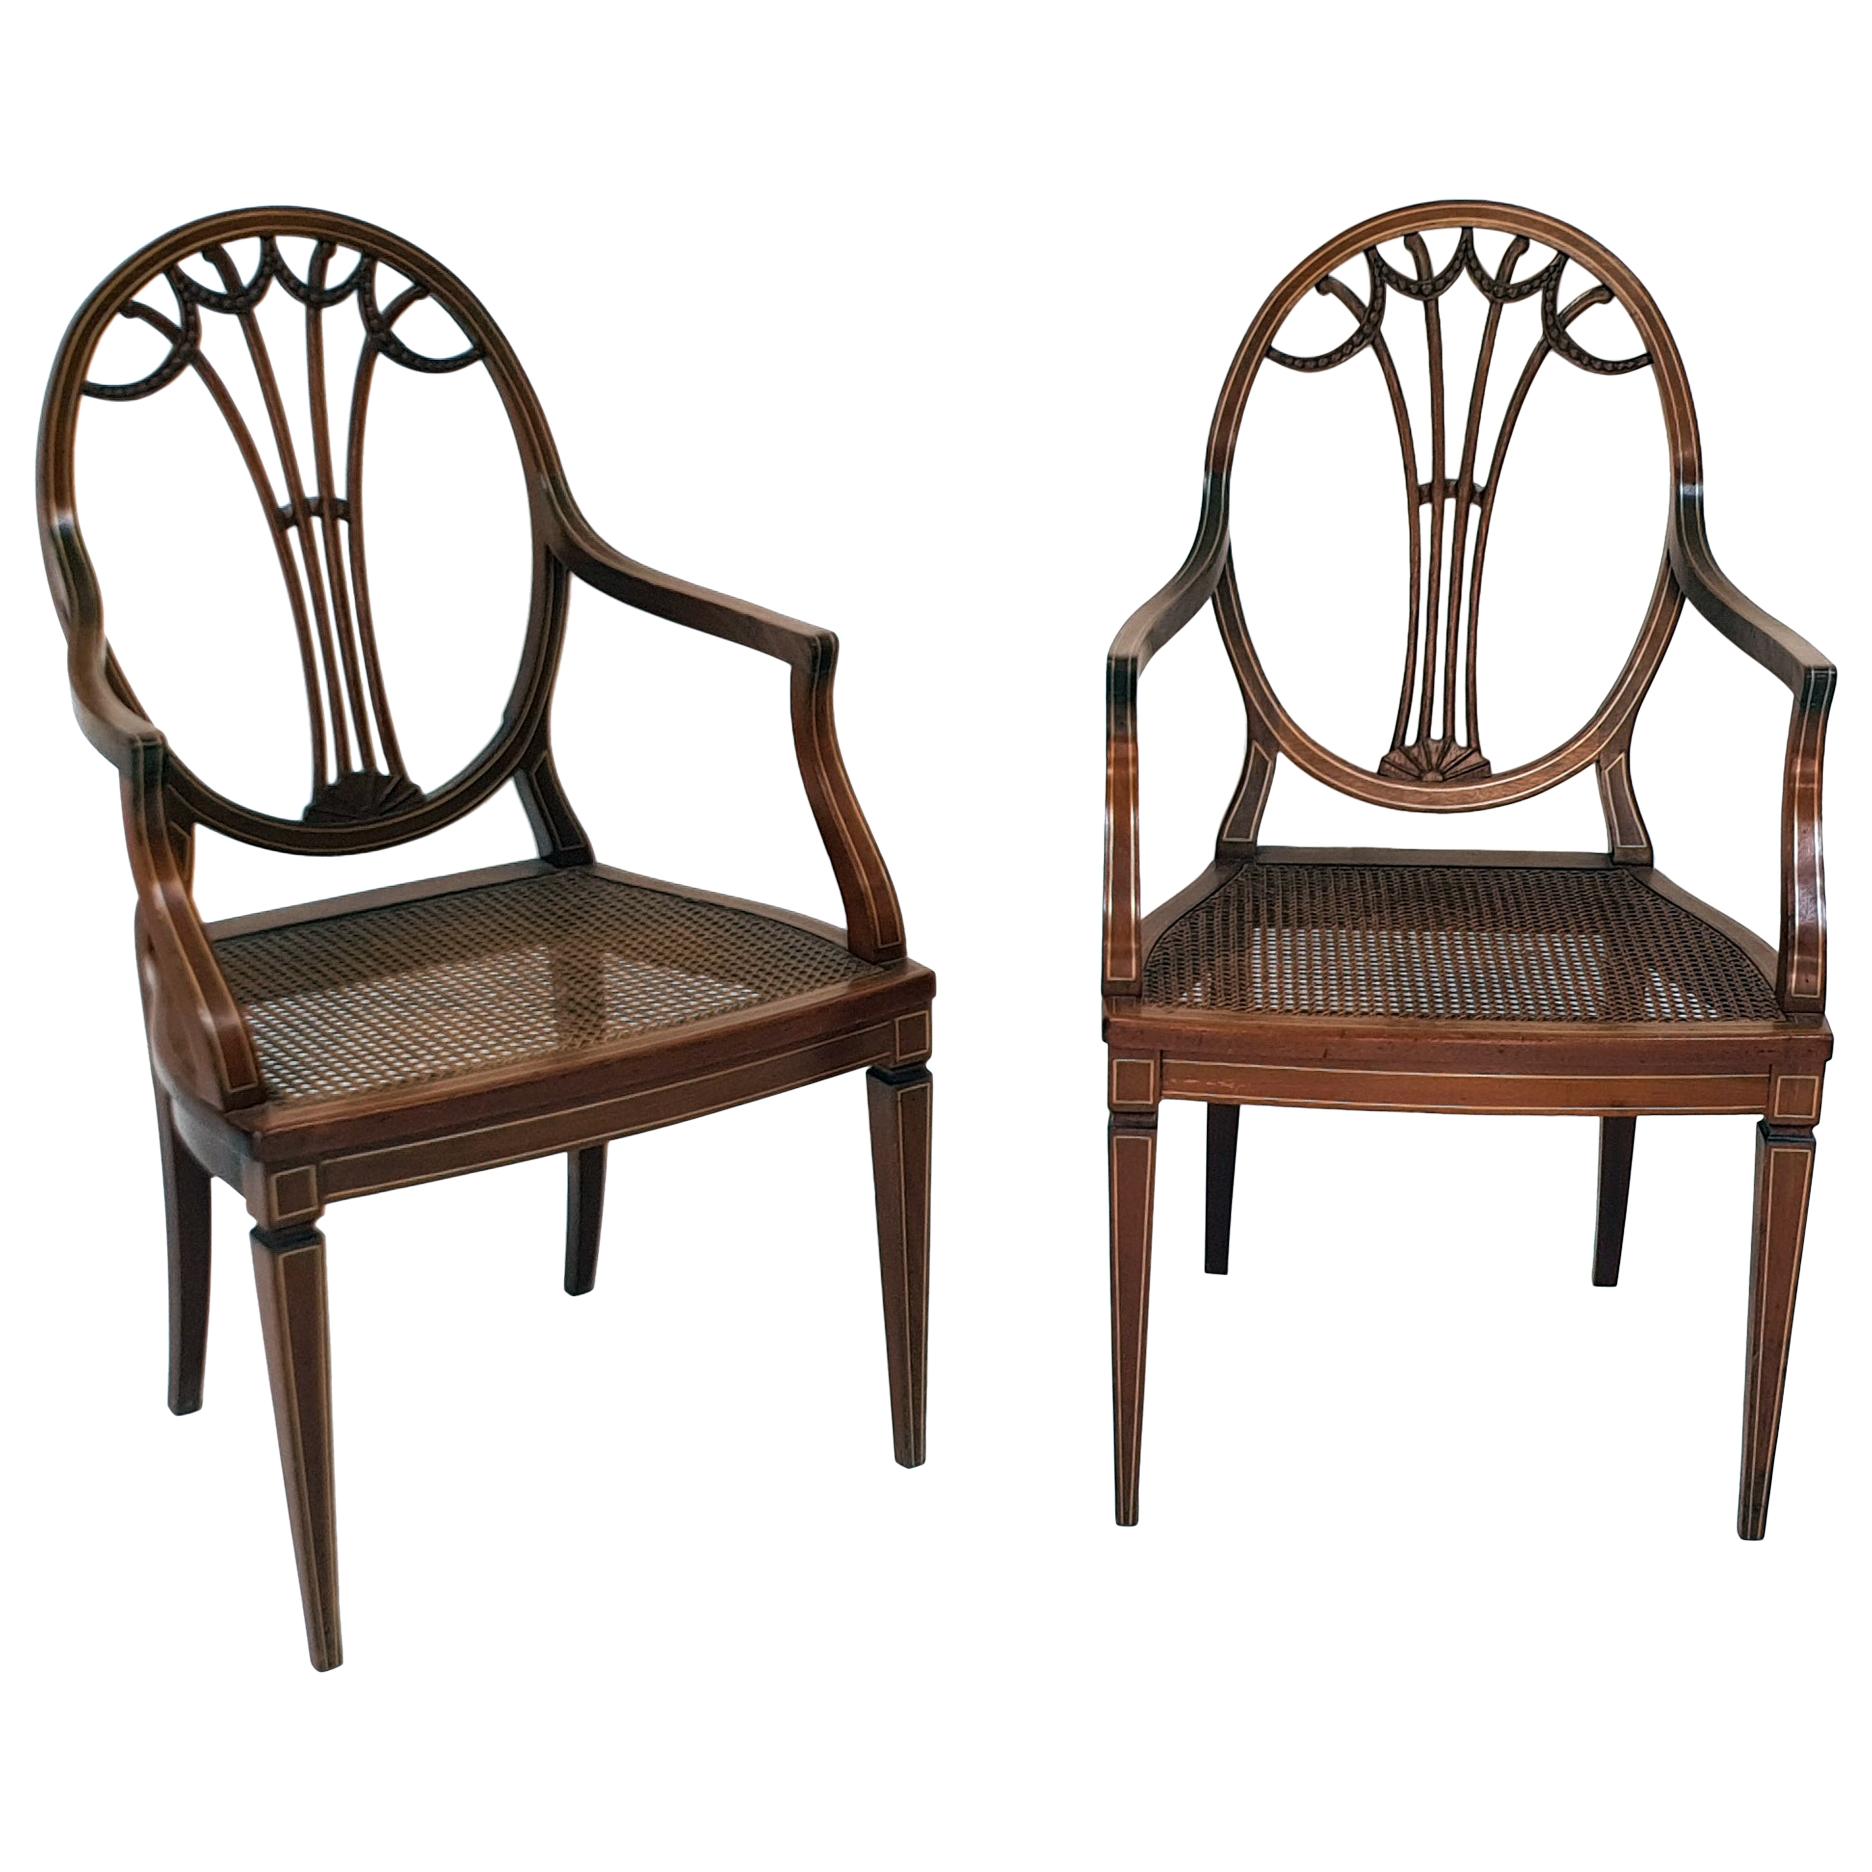 Pair of Armchairs, England, 1880s